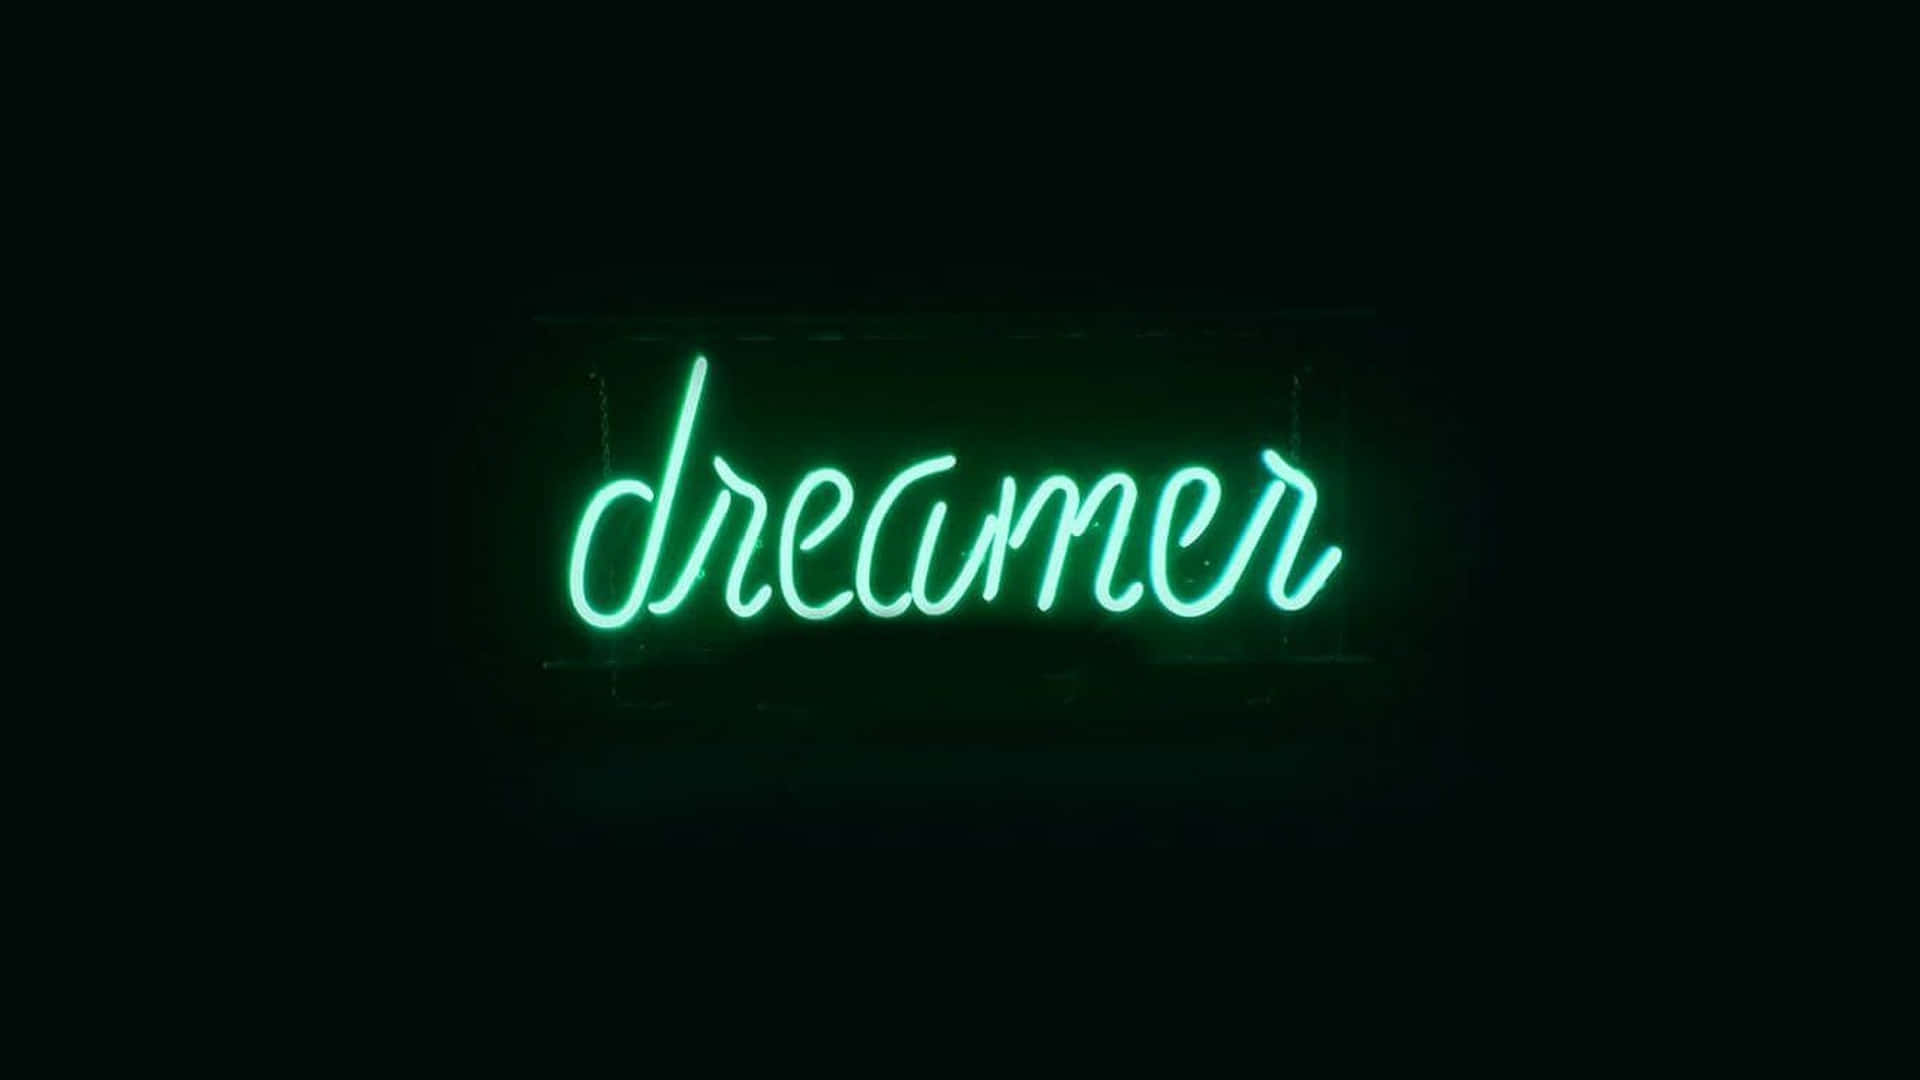 A neon sign that says dreamer - Lime green